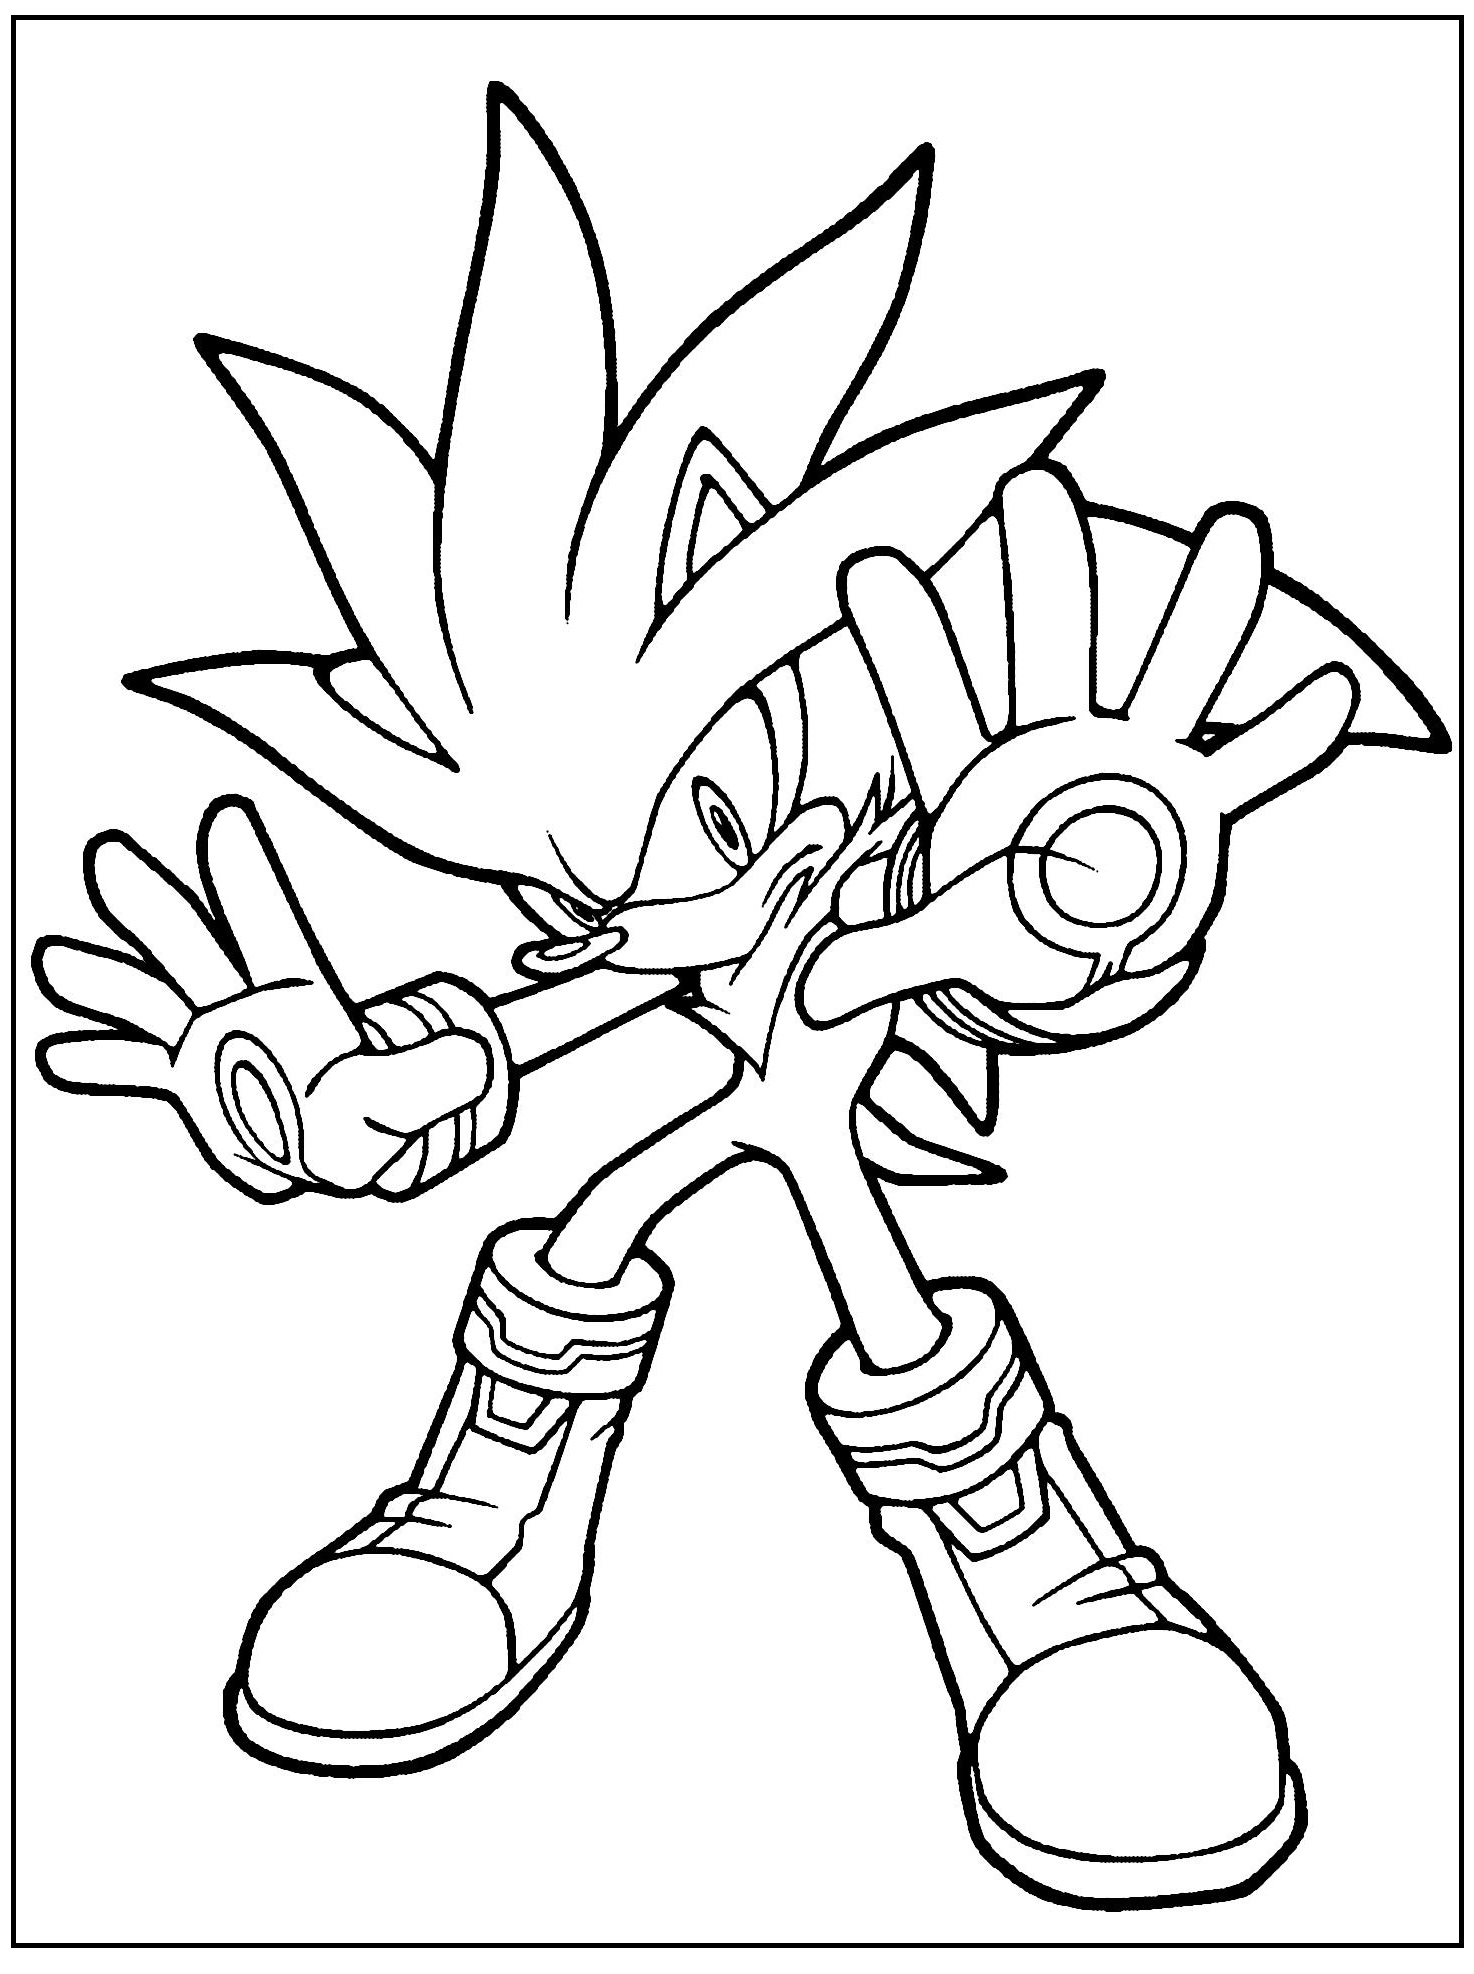 Silver The Hedgehog Coloring Pages at GetDrawings | Free download